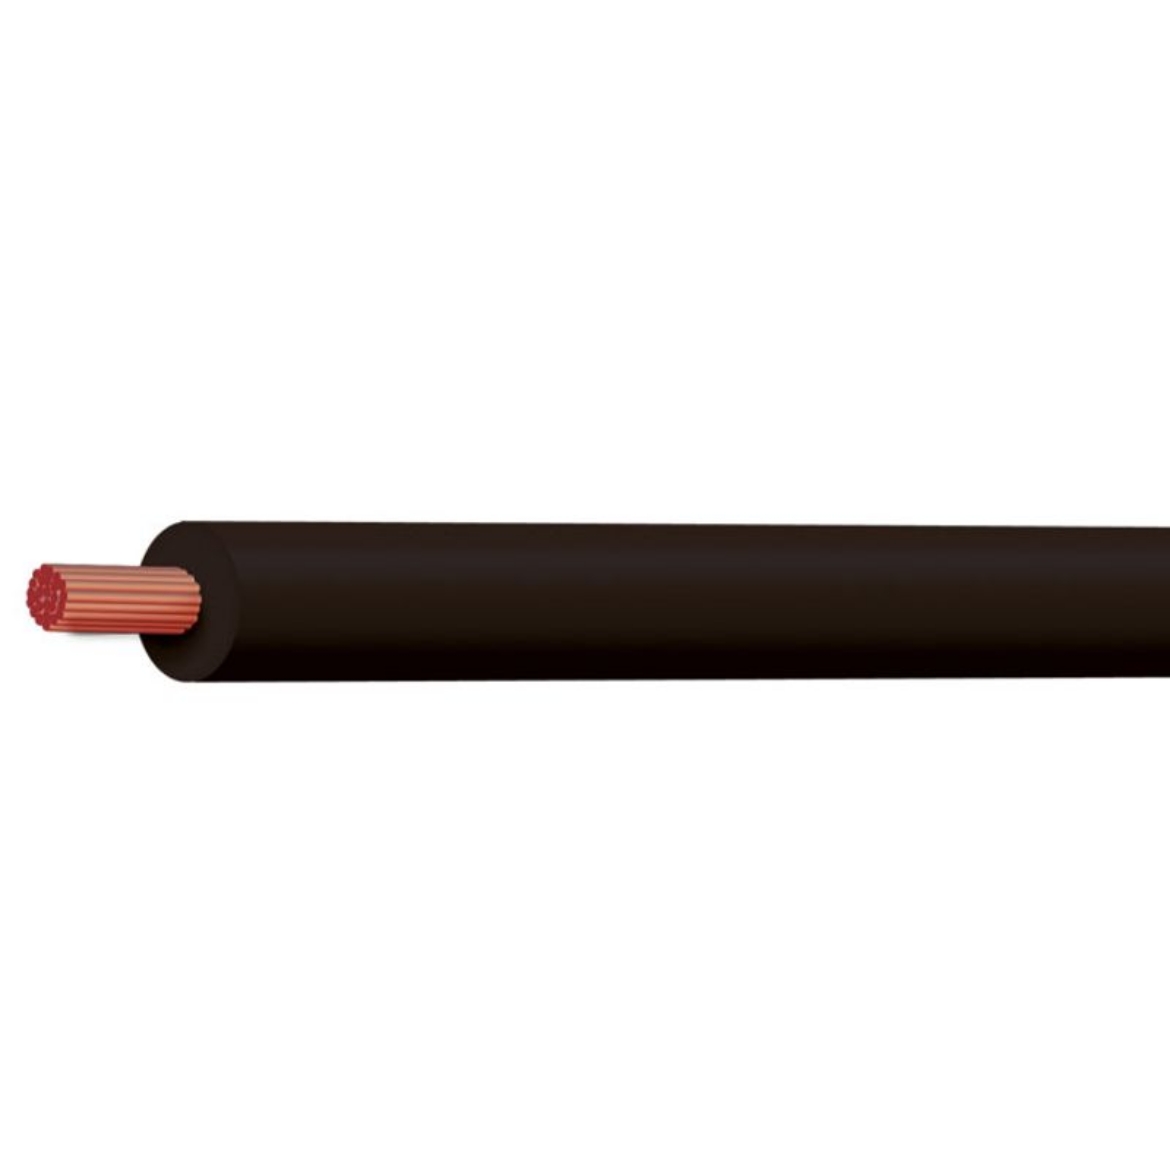 Picture of TYCAB SINGLE CORE CABLE BATTERY 8 B & S CROSS SECT 8MM SQ RATING 85A BLACK - 100M ROLL